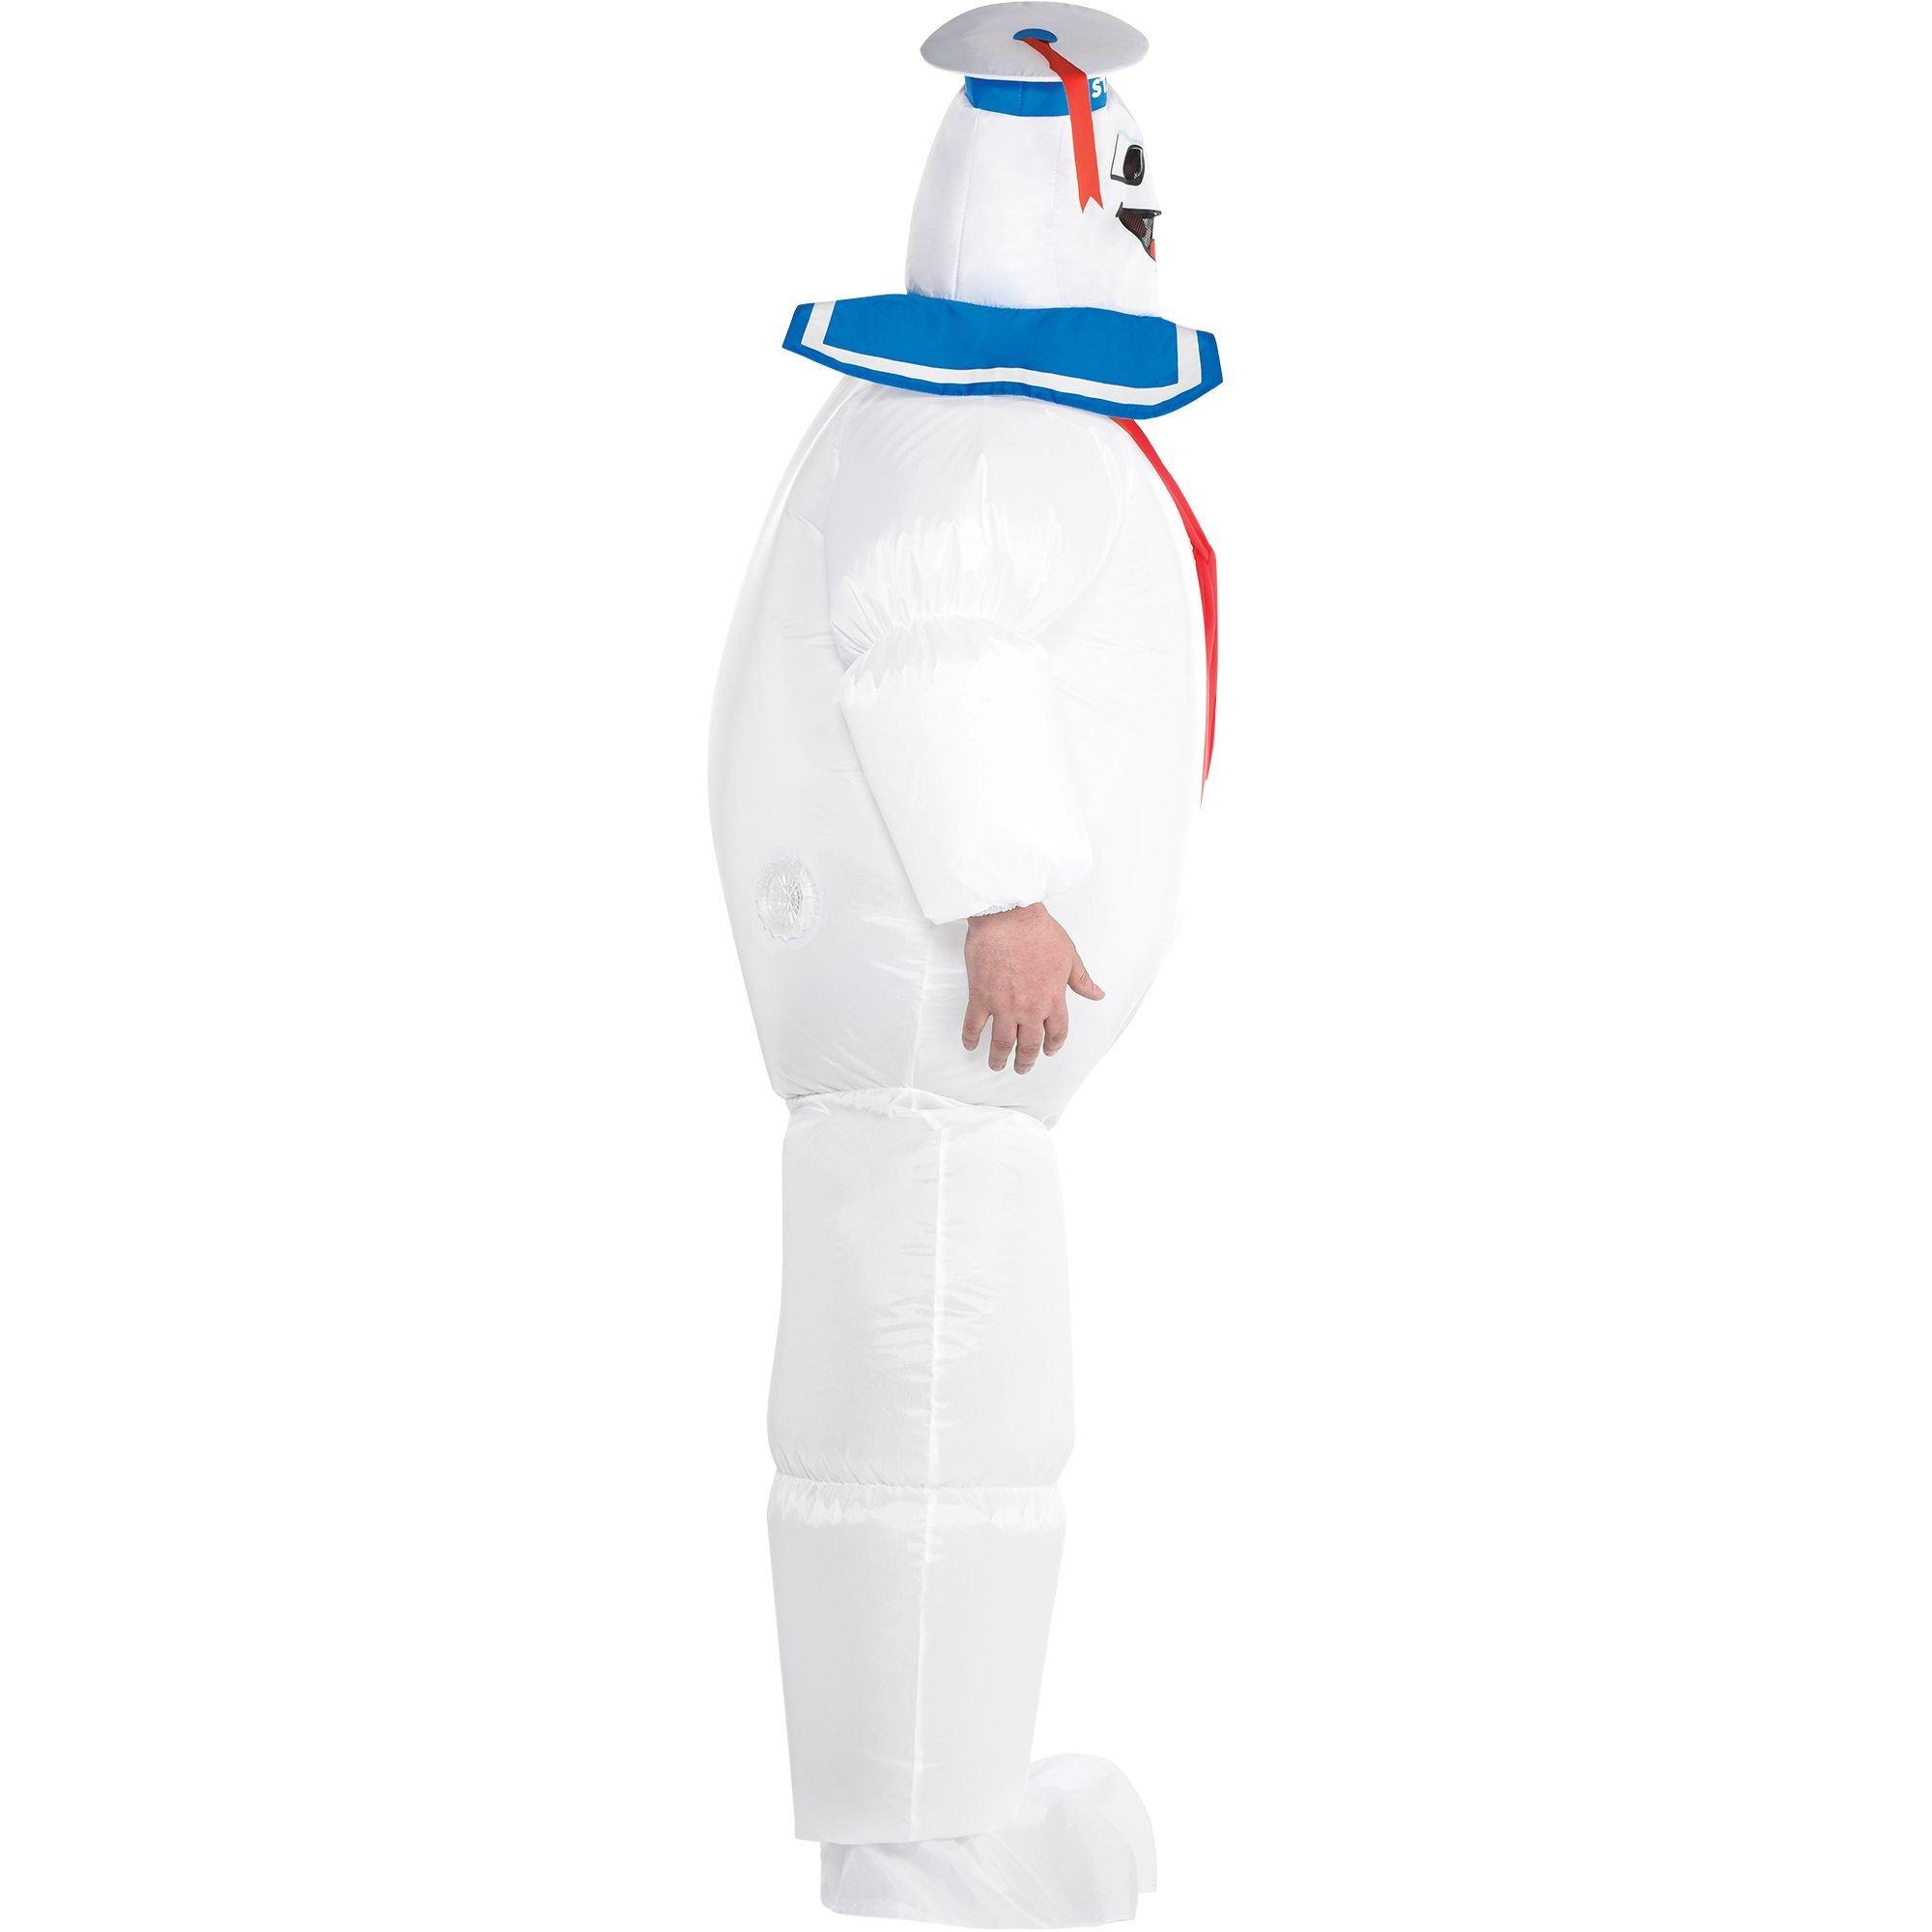 Adult Classic Inflatable Stay Puft Marshmallow Man Costume Plus Size - Ghostbusters